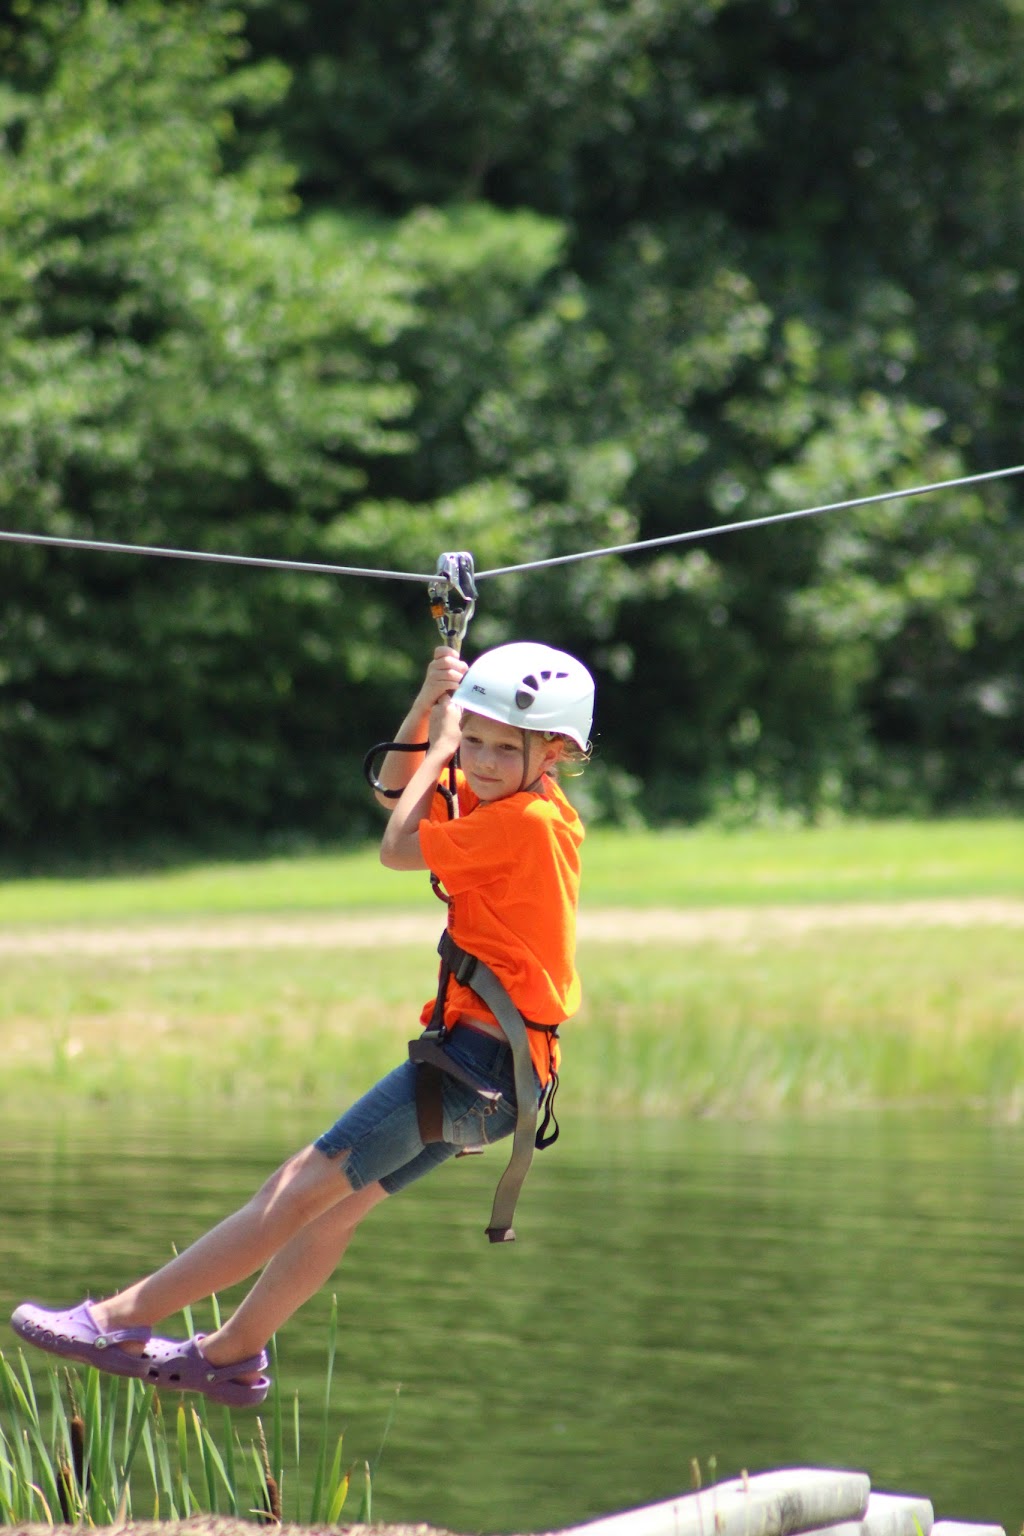 Boulder Ridge Day Camp | 104 Goose Green Rd, Barkhamsted, CT 06063 | Phone: (860) 379-6500